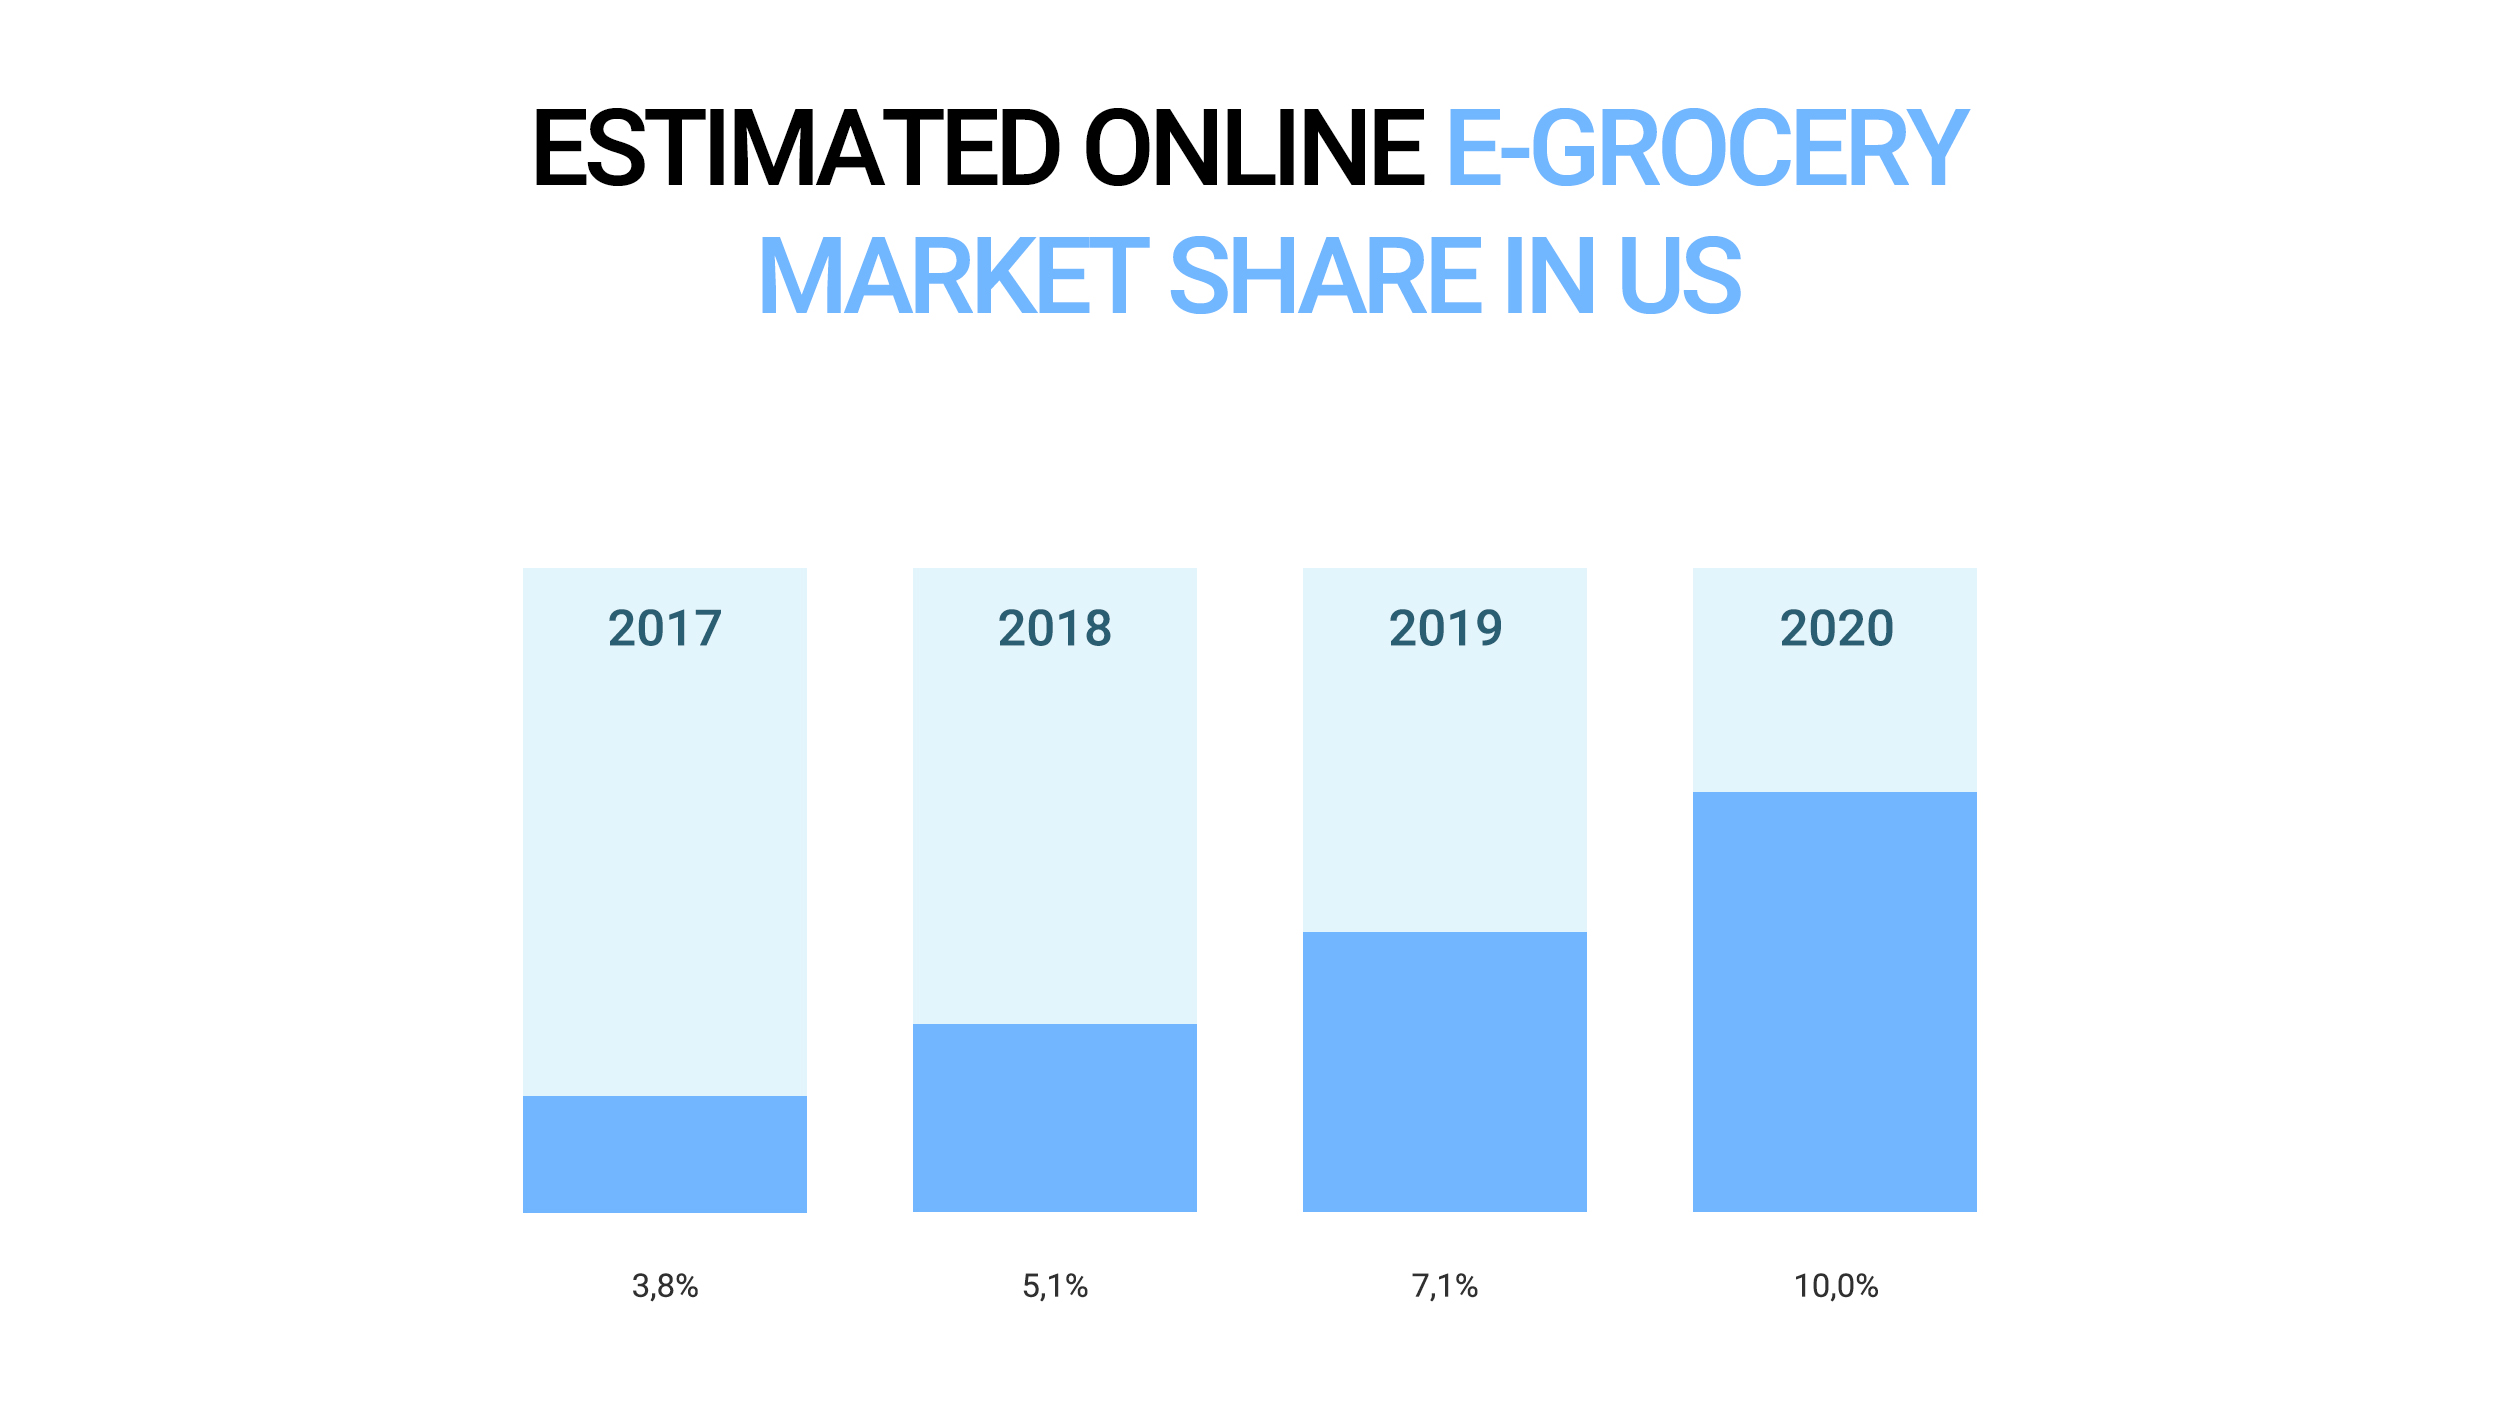 Estimated online e-grocery market share in US